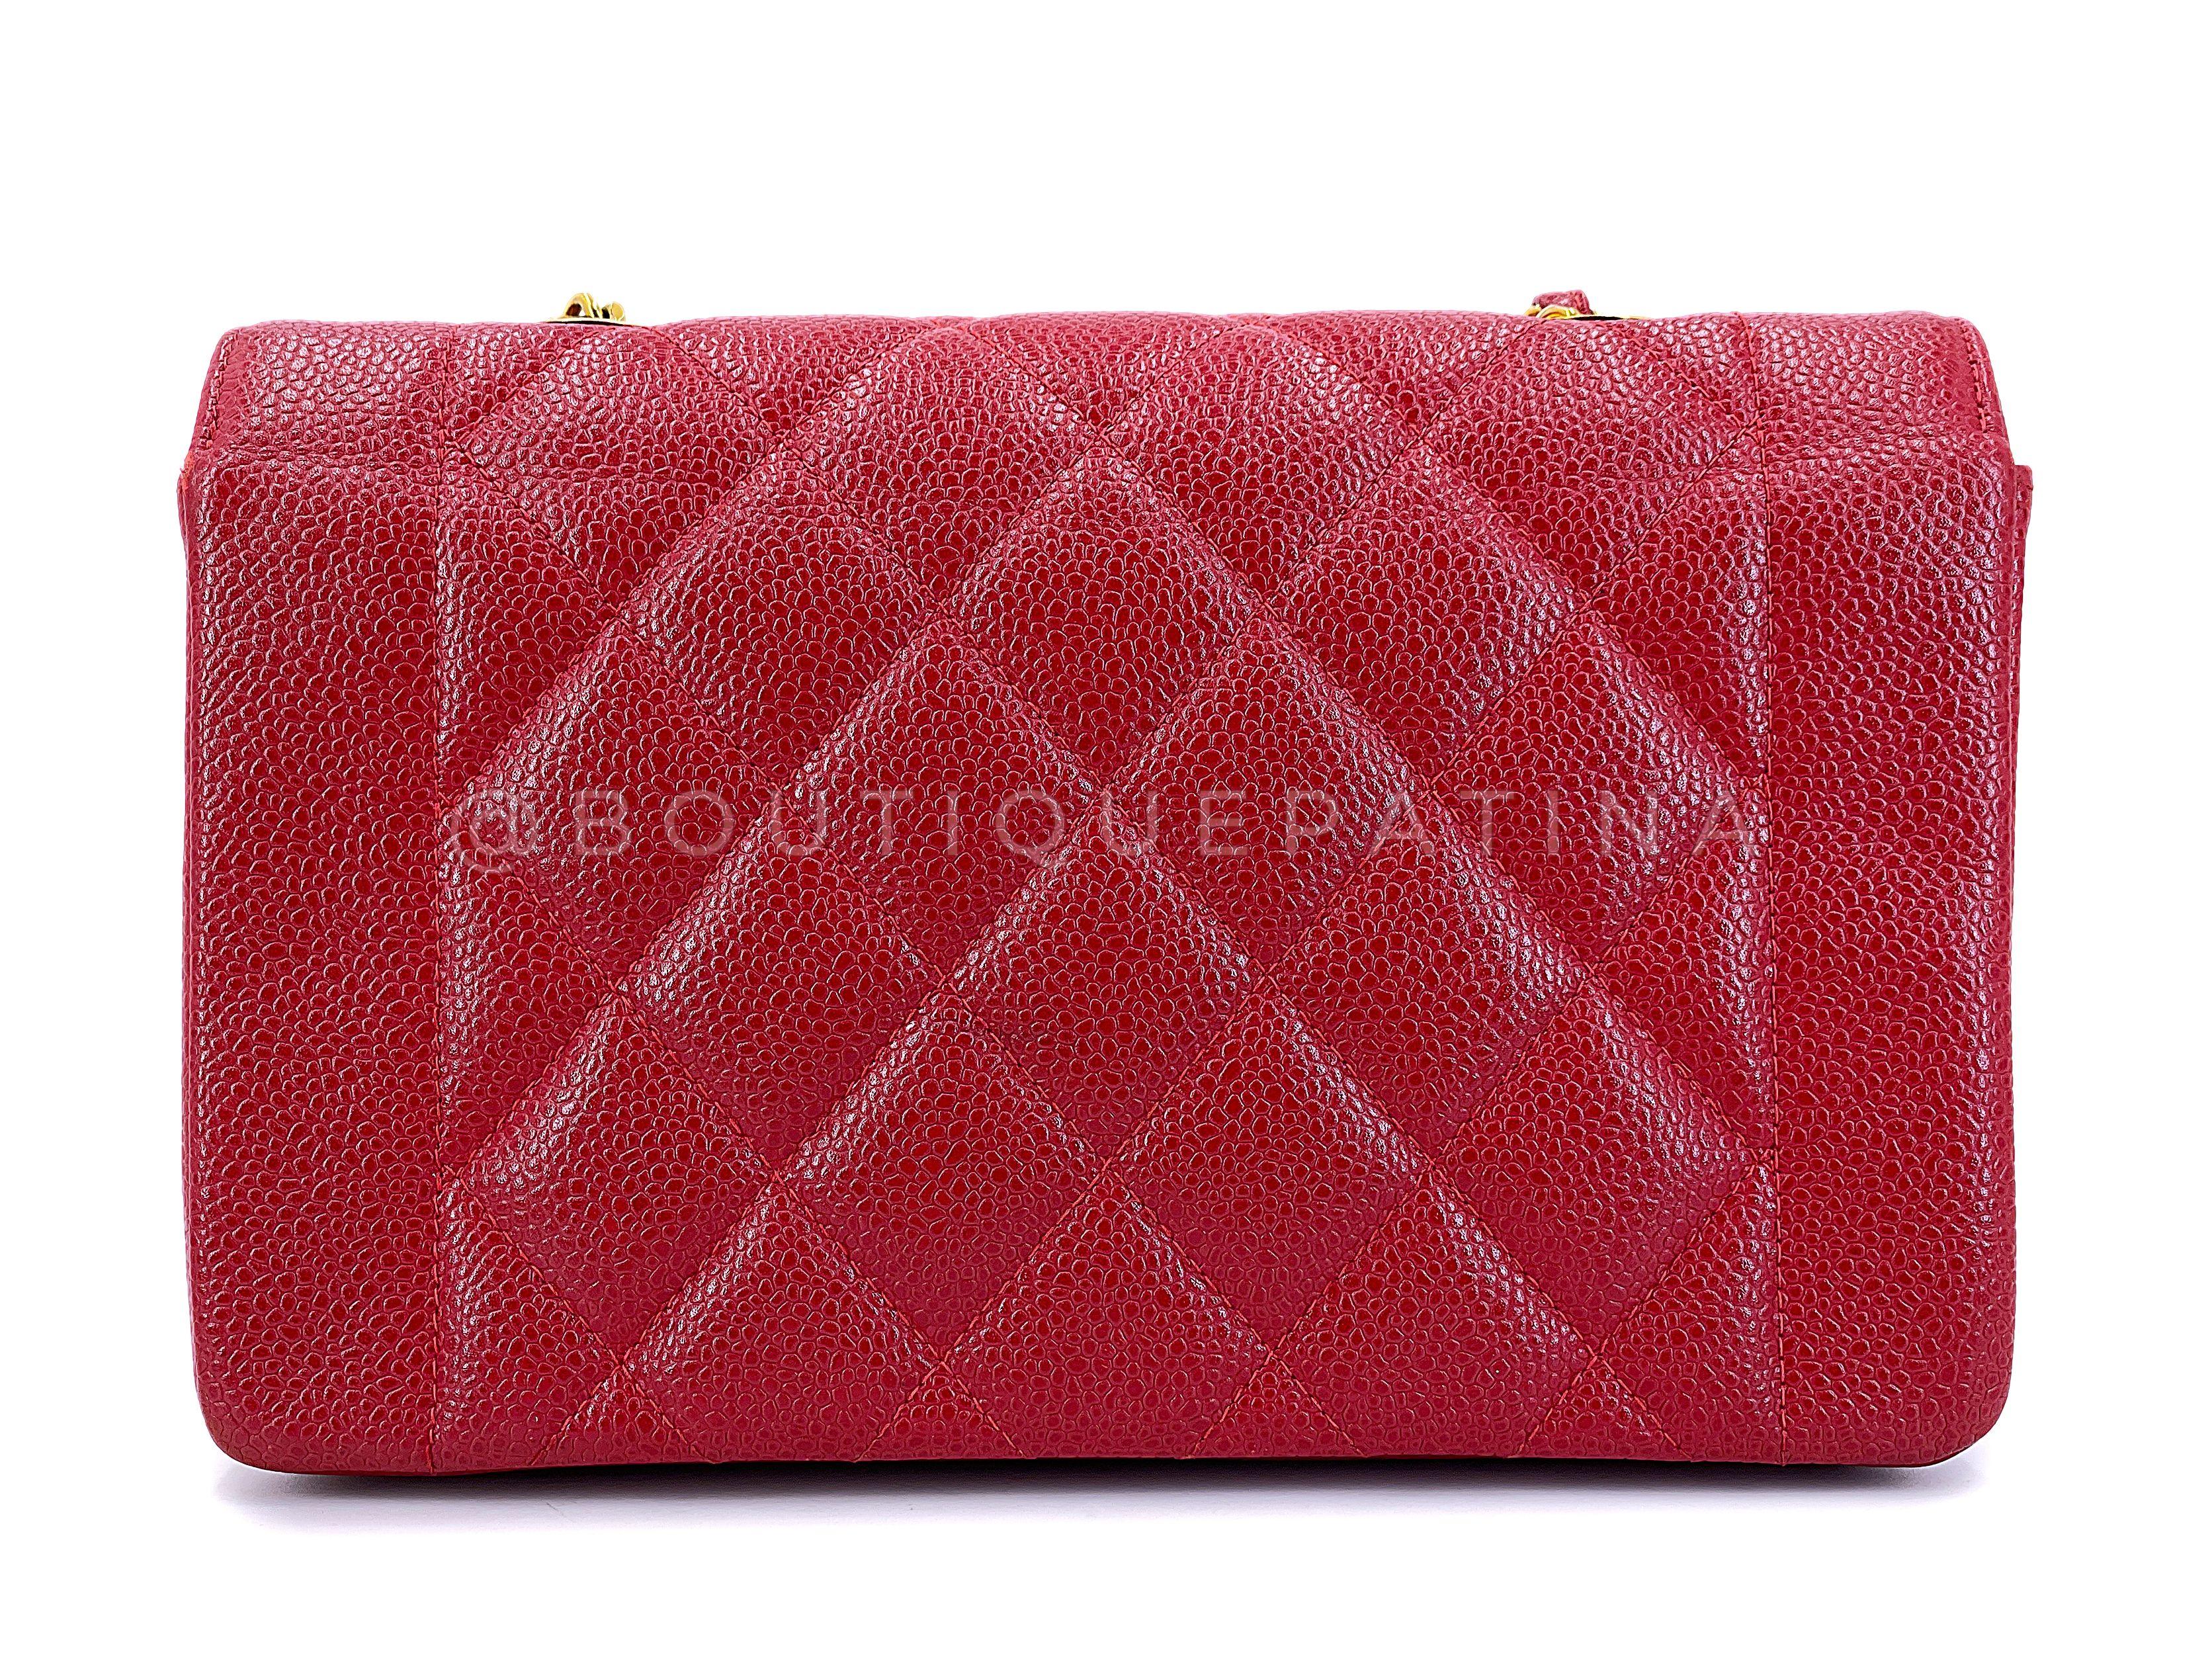 Chanel Vintage Red Caviar Small Diana Flap Bag 24k GHW 67655 For Sale 1